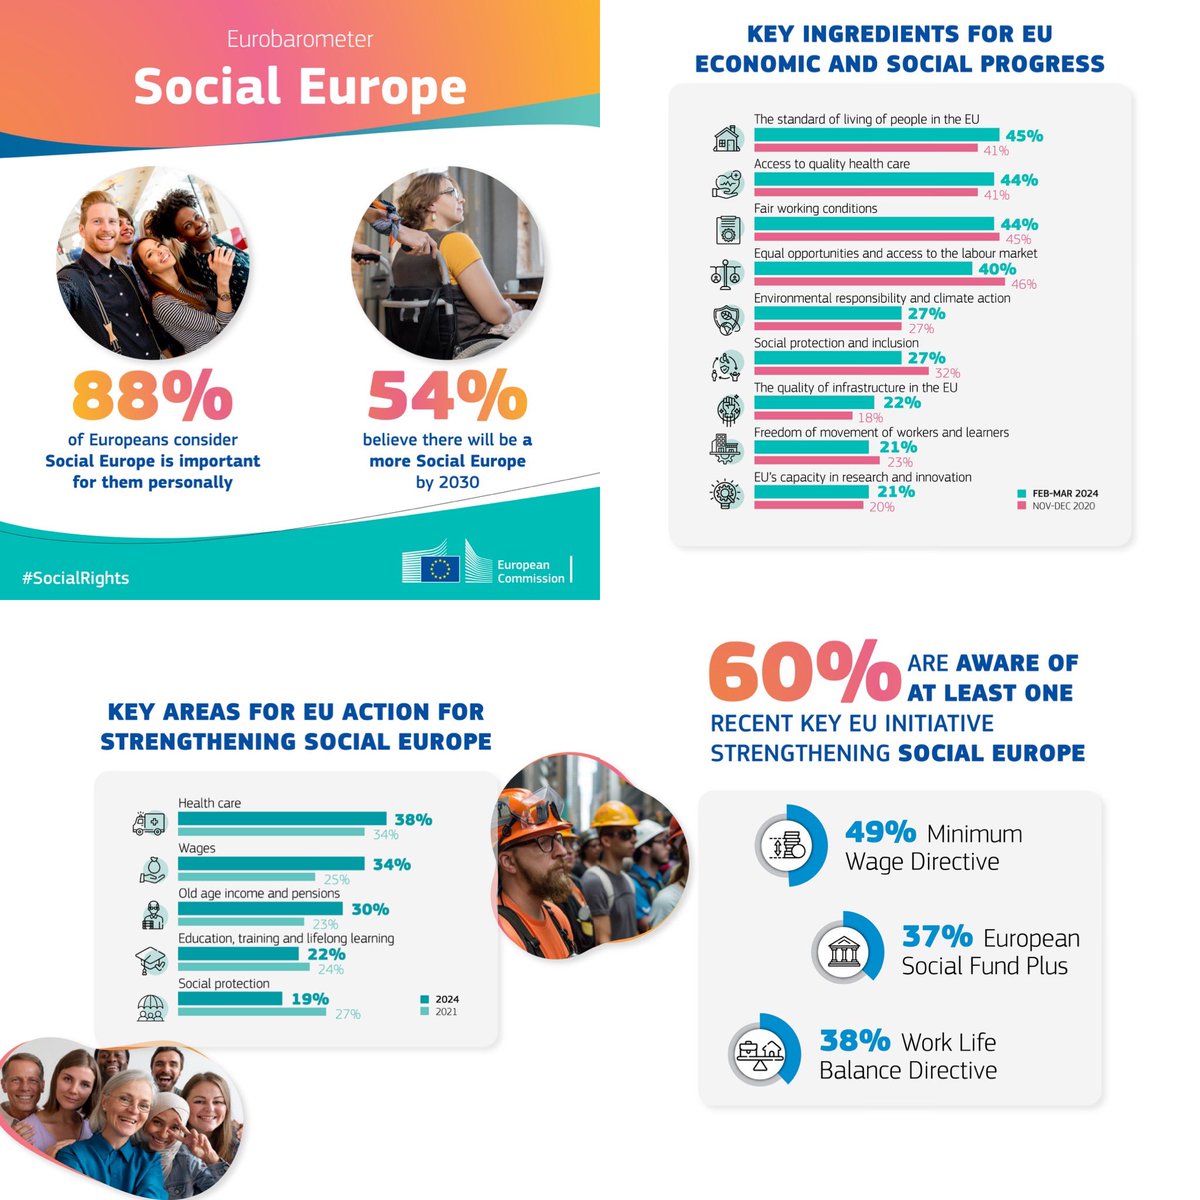 During this mandate we have been putting social through all EU policies. This is what EU citizens want from us: 88% say a social Europe is important to them personally. Tune in at 15.30 today for my speech at La Hulpe on the future of social Europe. youtube.com/watch?v=In7pek…